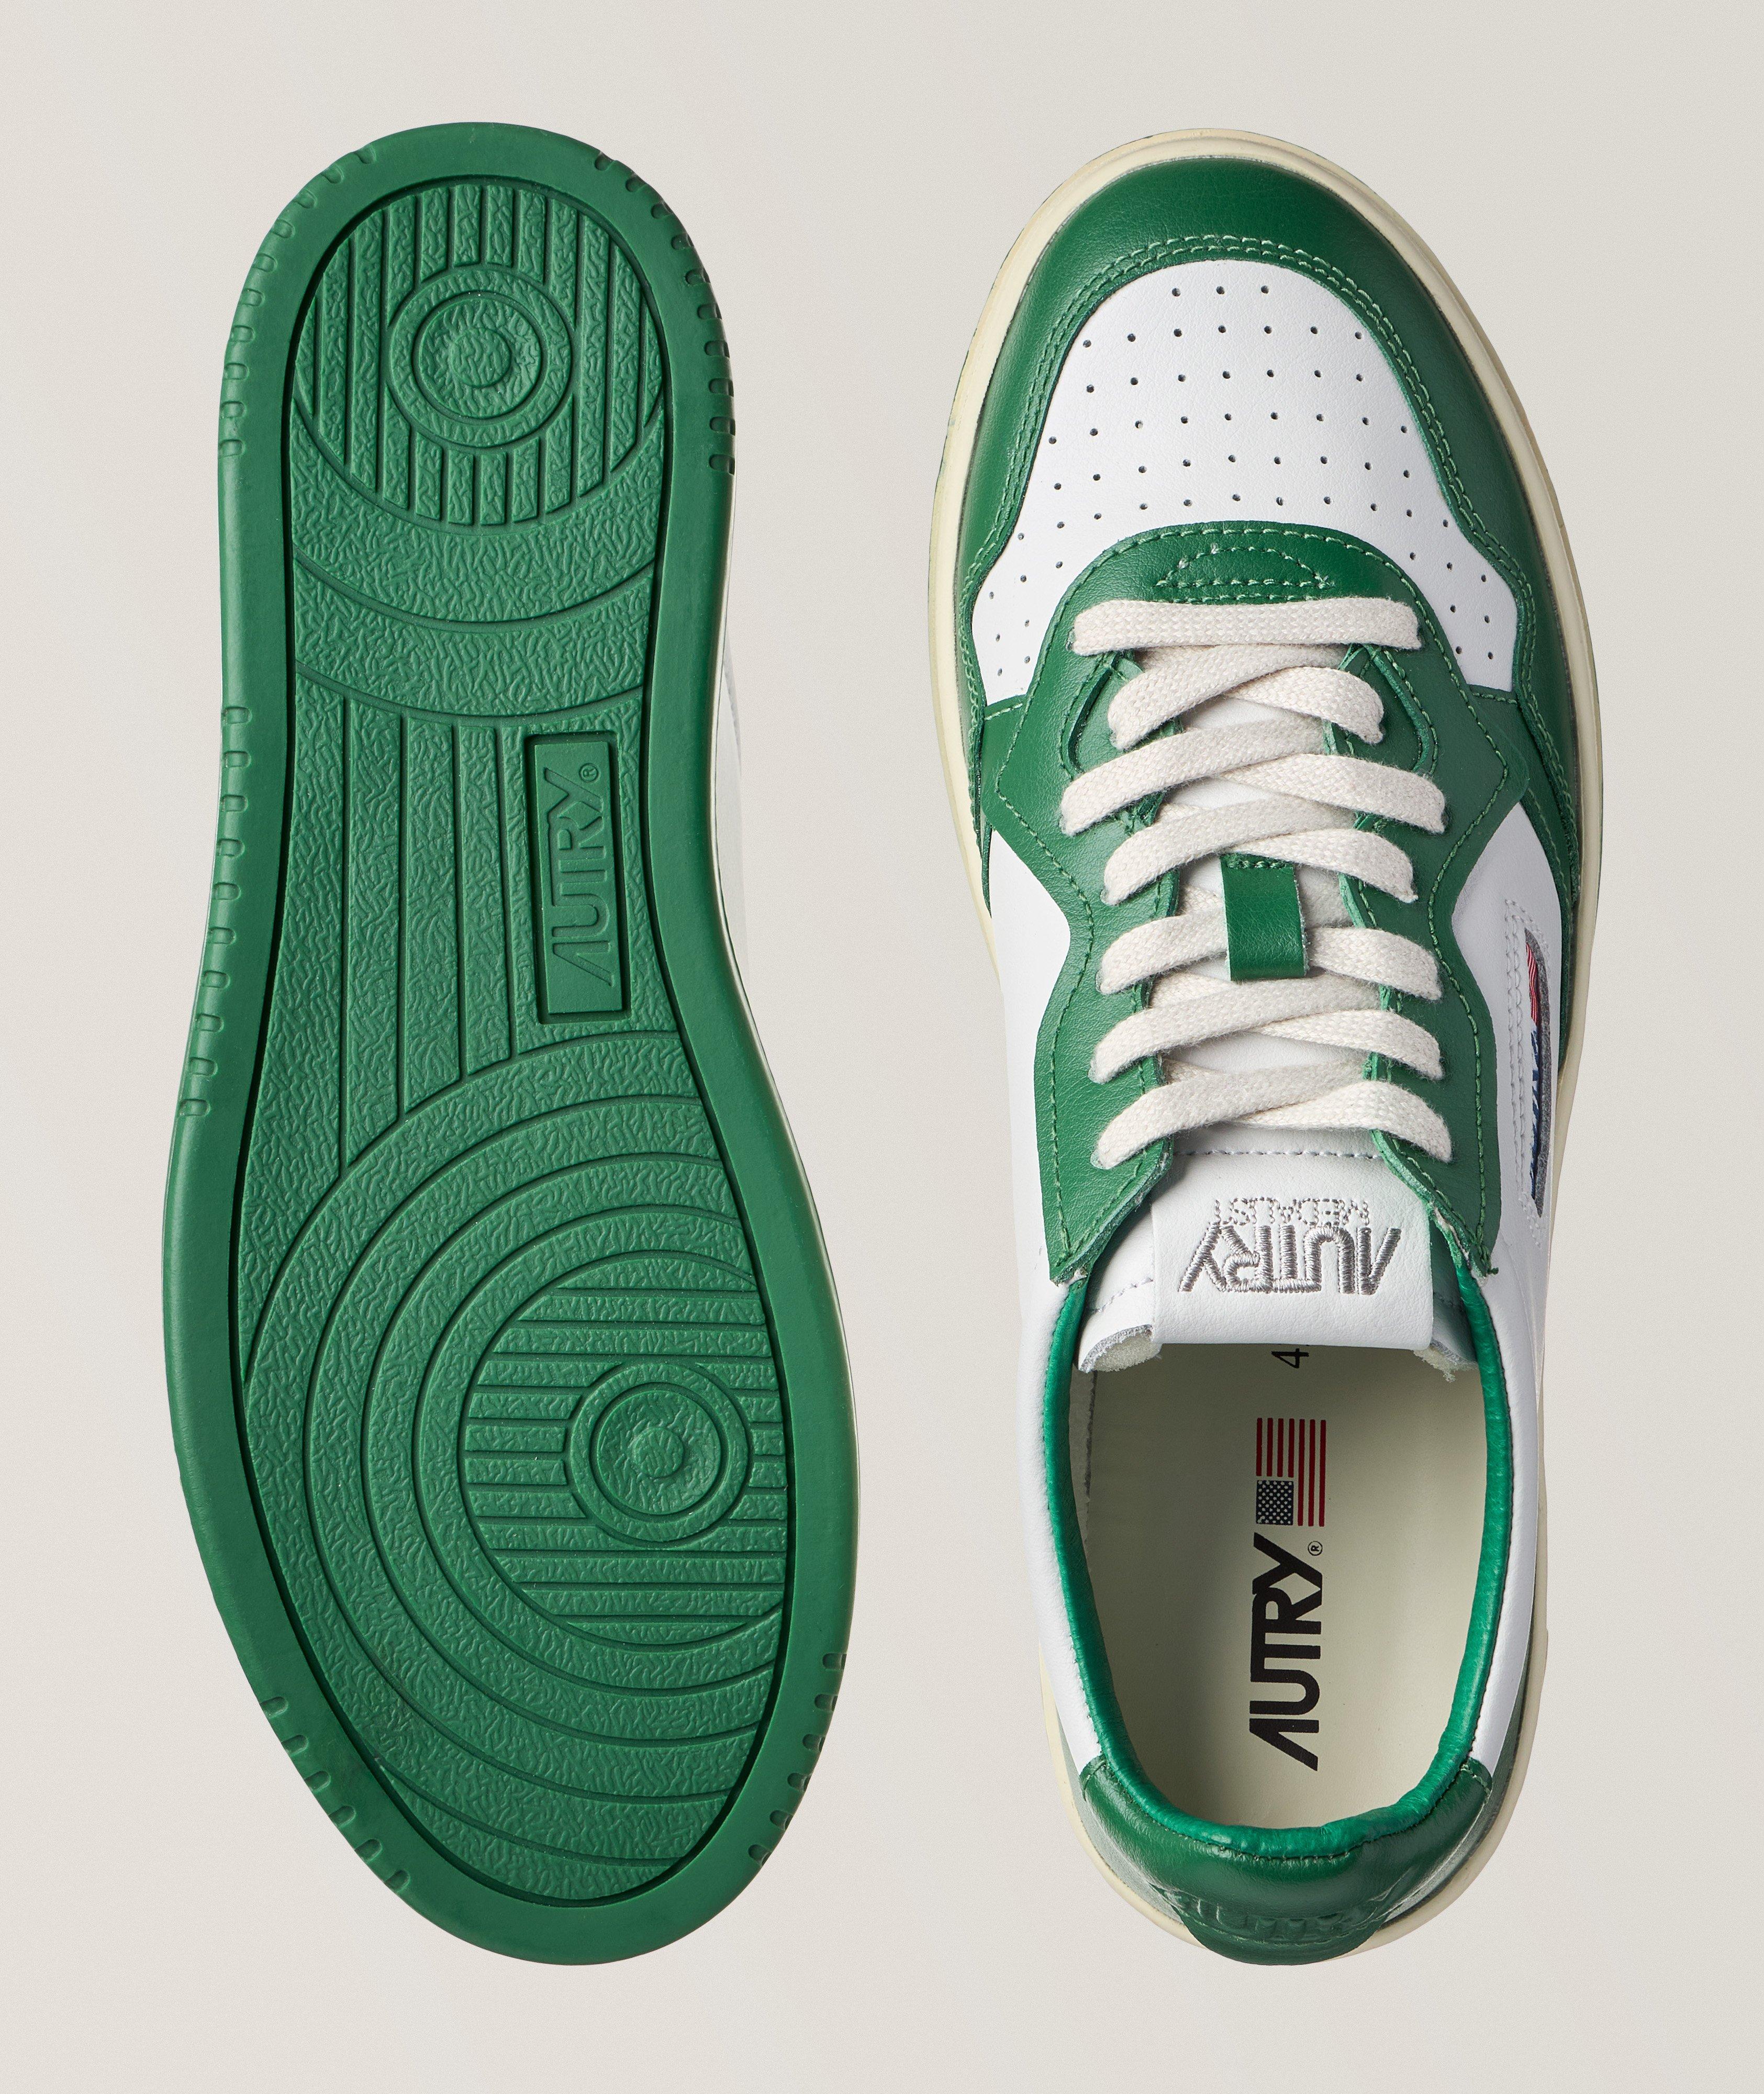 Medalist Leather Sneakers